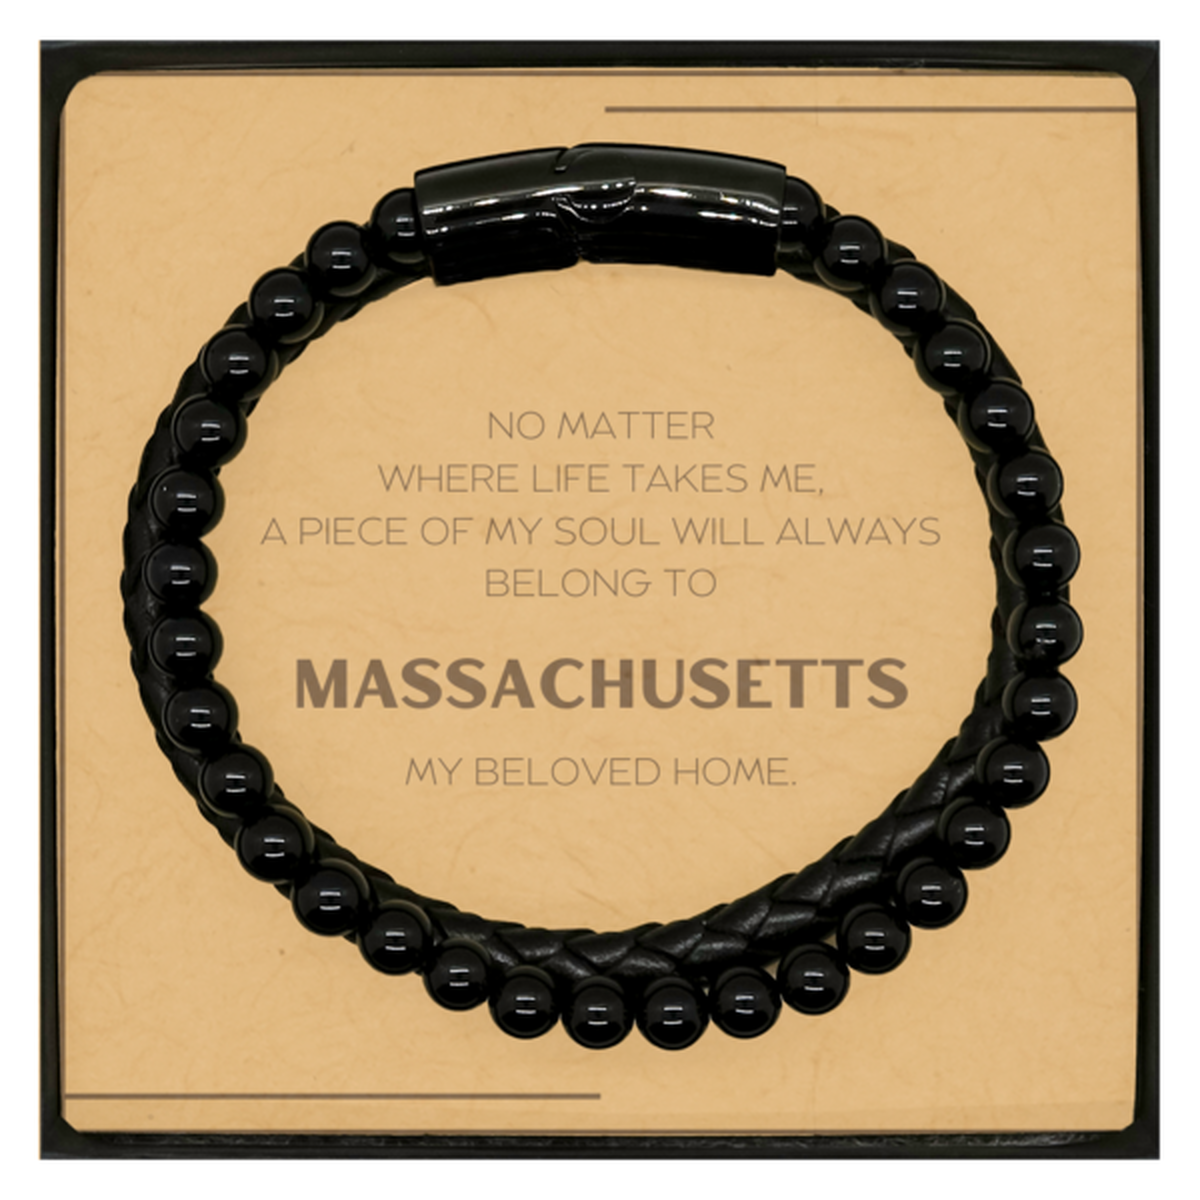 Love Massachusetts State Gifts, My soul will always belong to Massachusetts, Proud Stone Leather Bracelets, Birthday Christmas Unique Gifts For Massachusetts Men, Women, Friends